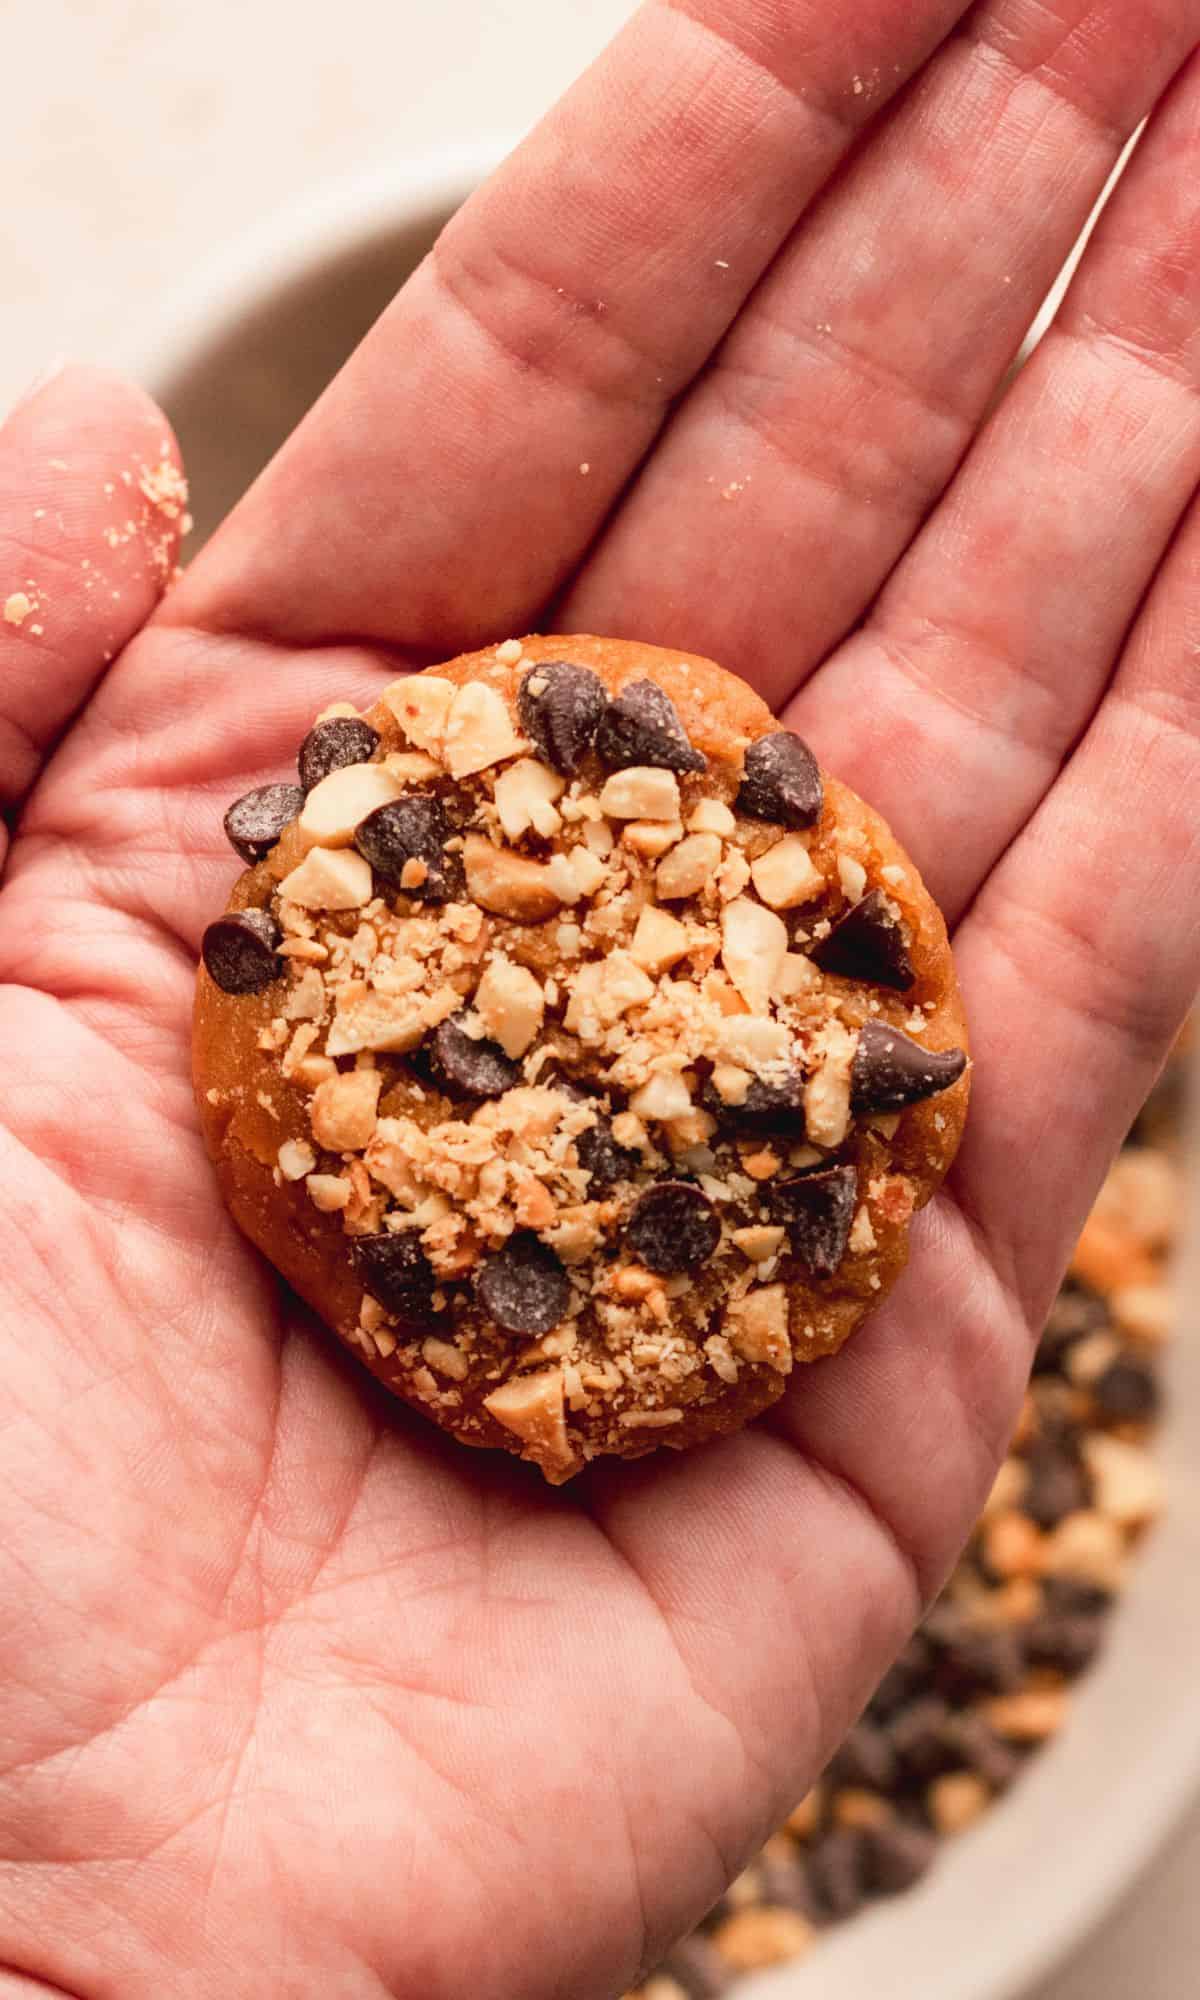 A prepped peanut butter chocolate chip cookie dough ball in a hand.